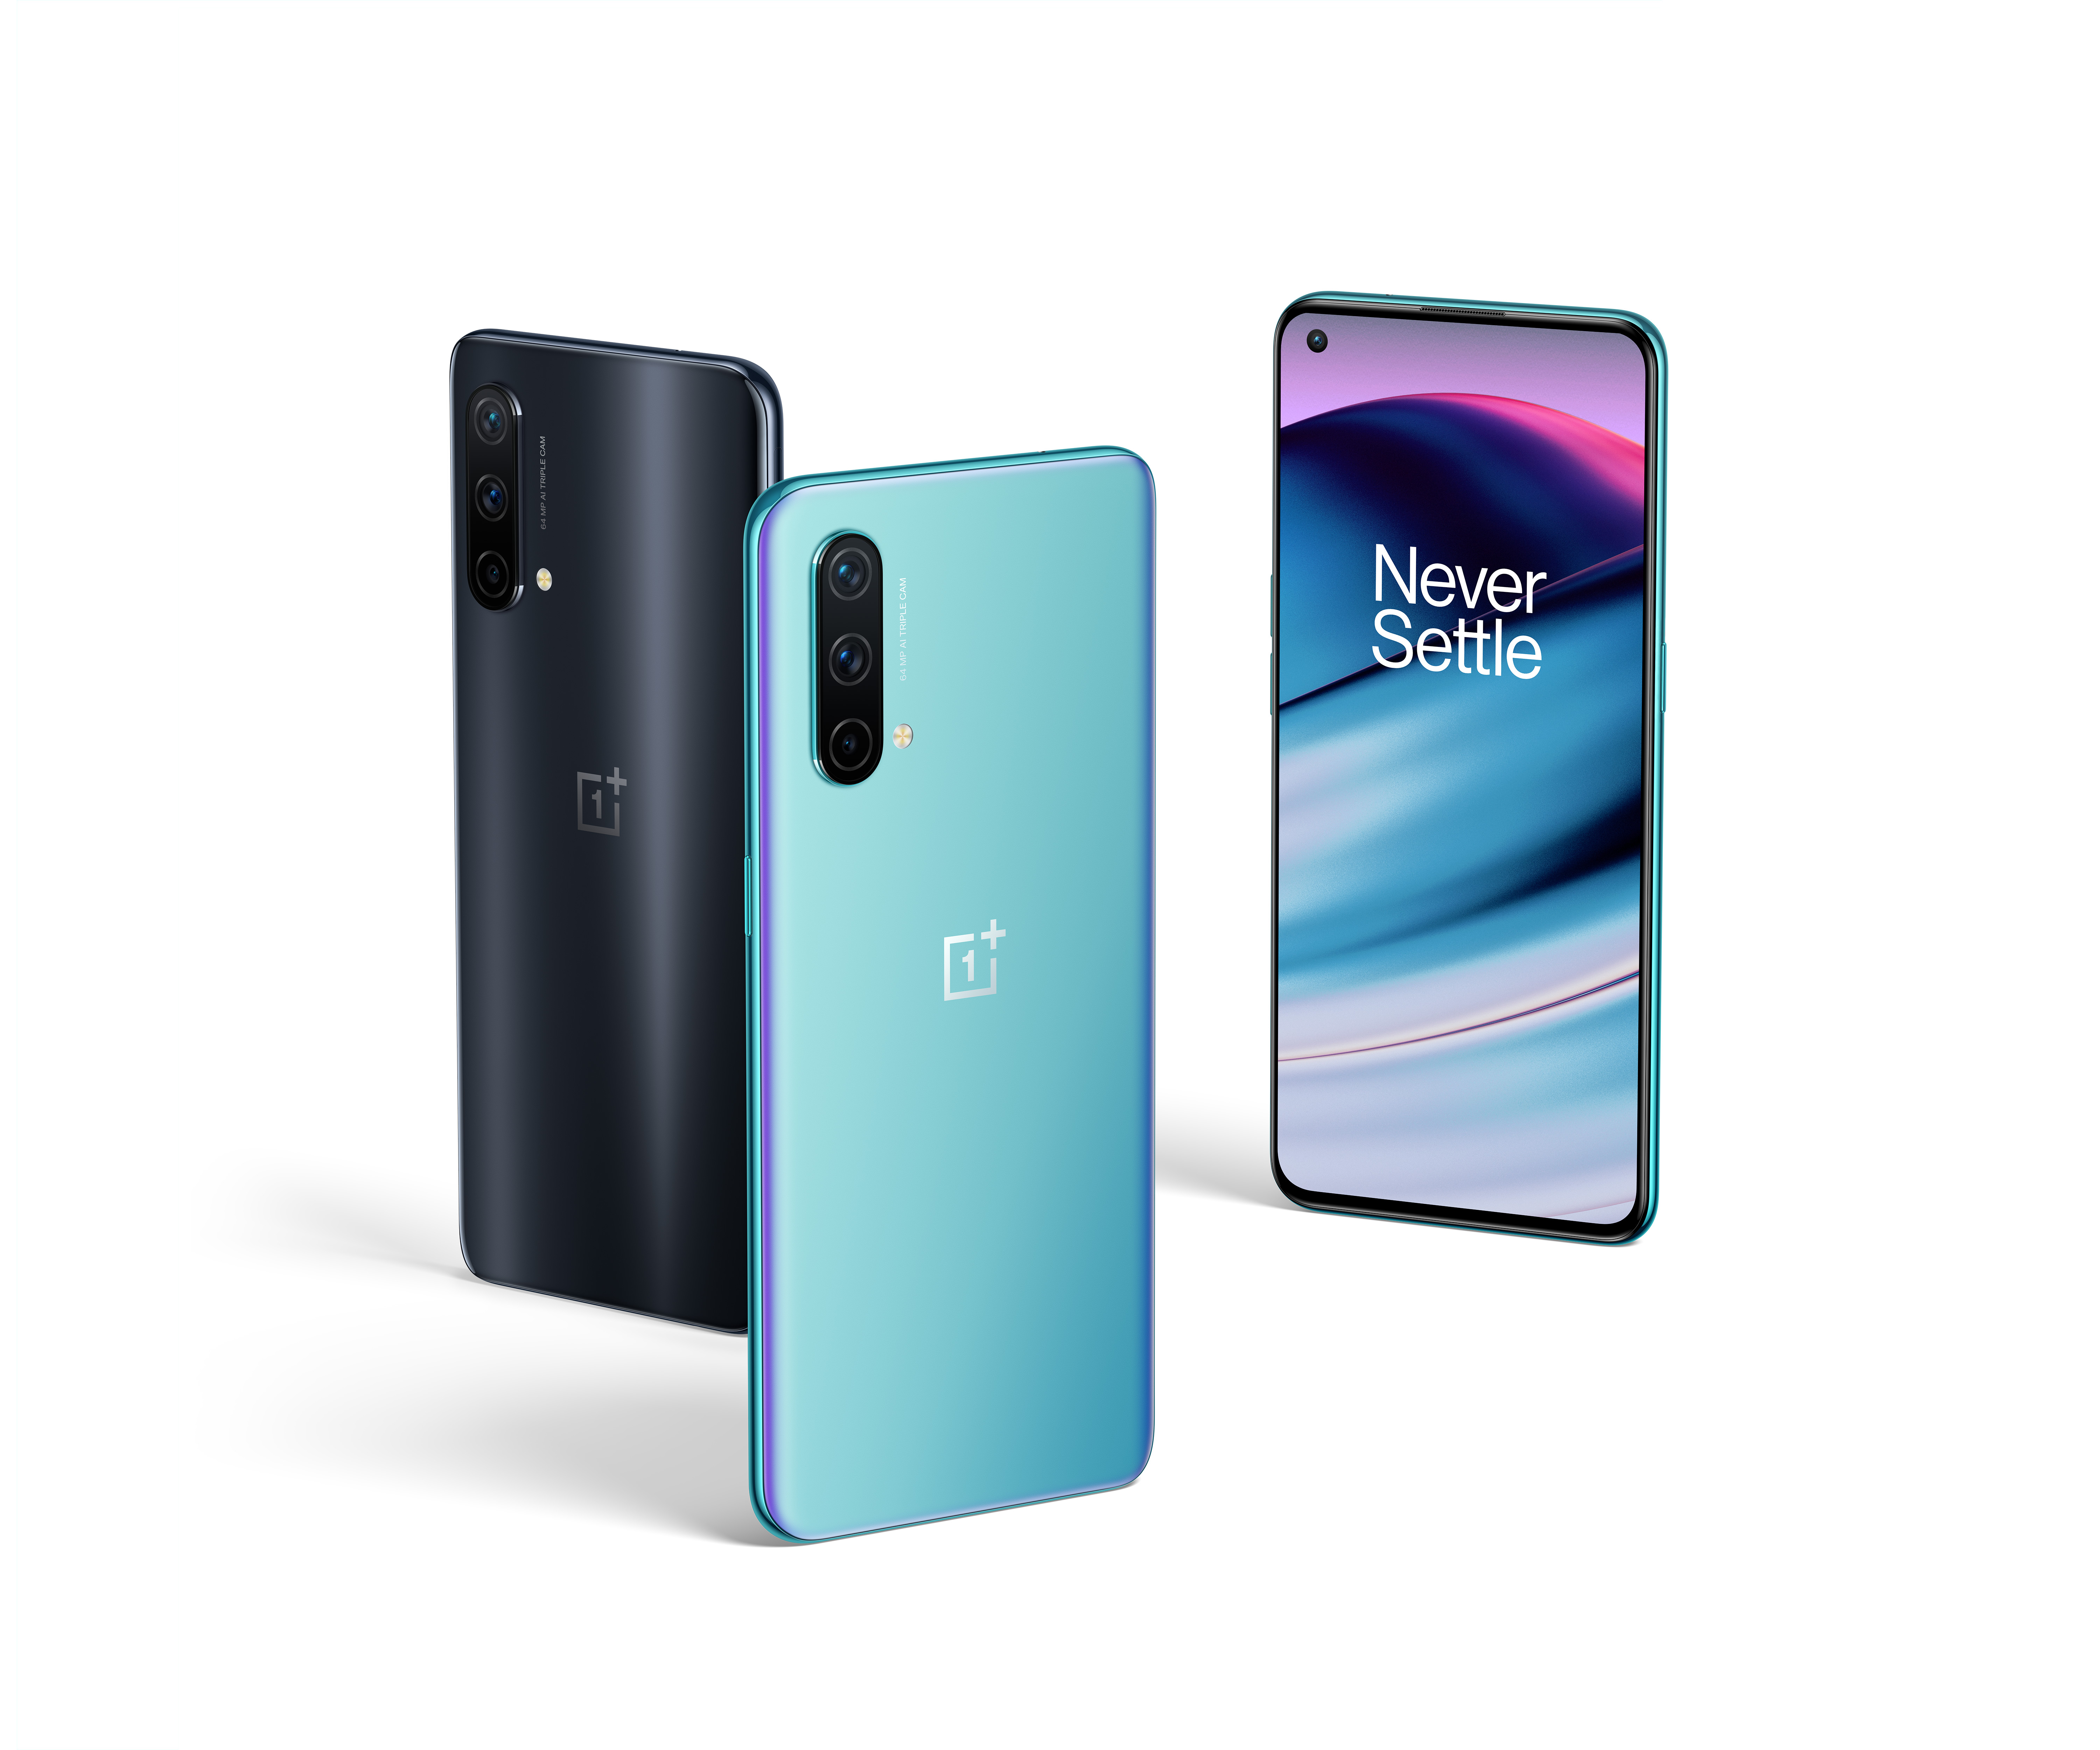 OnePlus Nord CE 5G 8GB/128GB Charcoal Ink